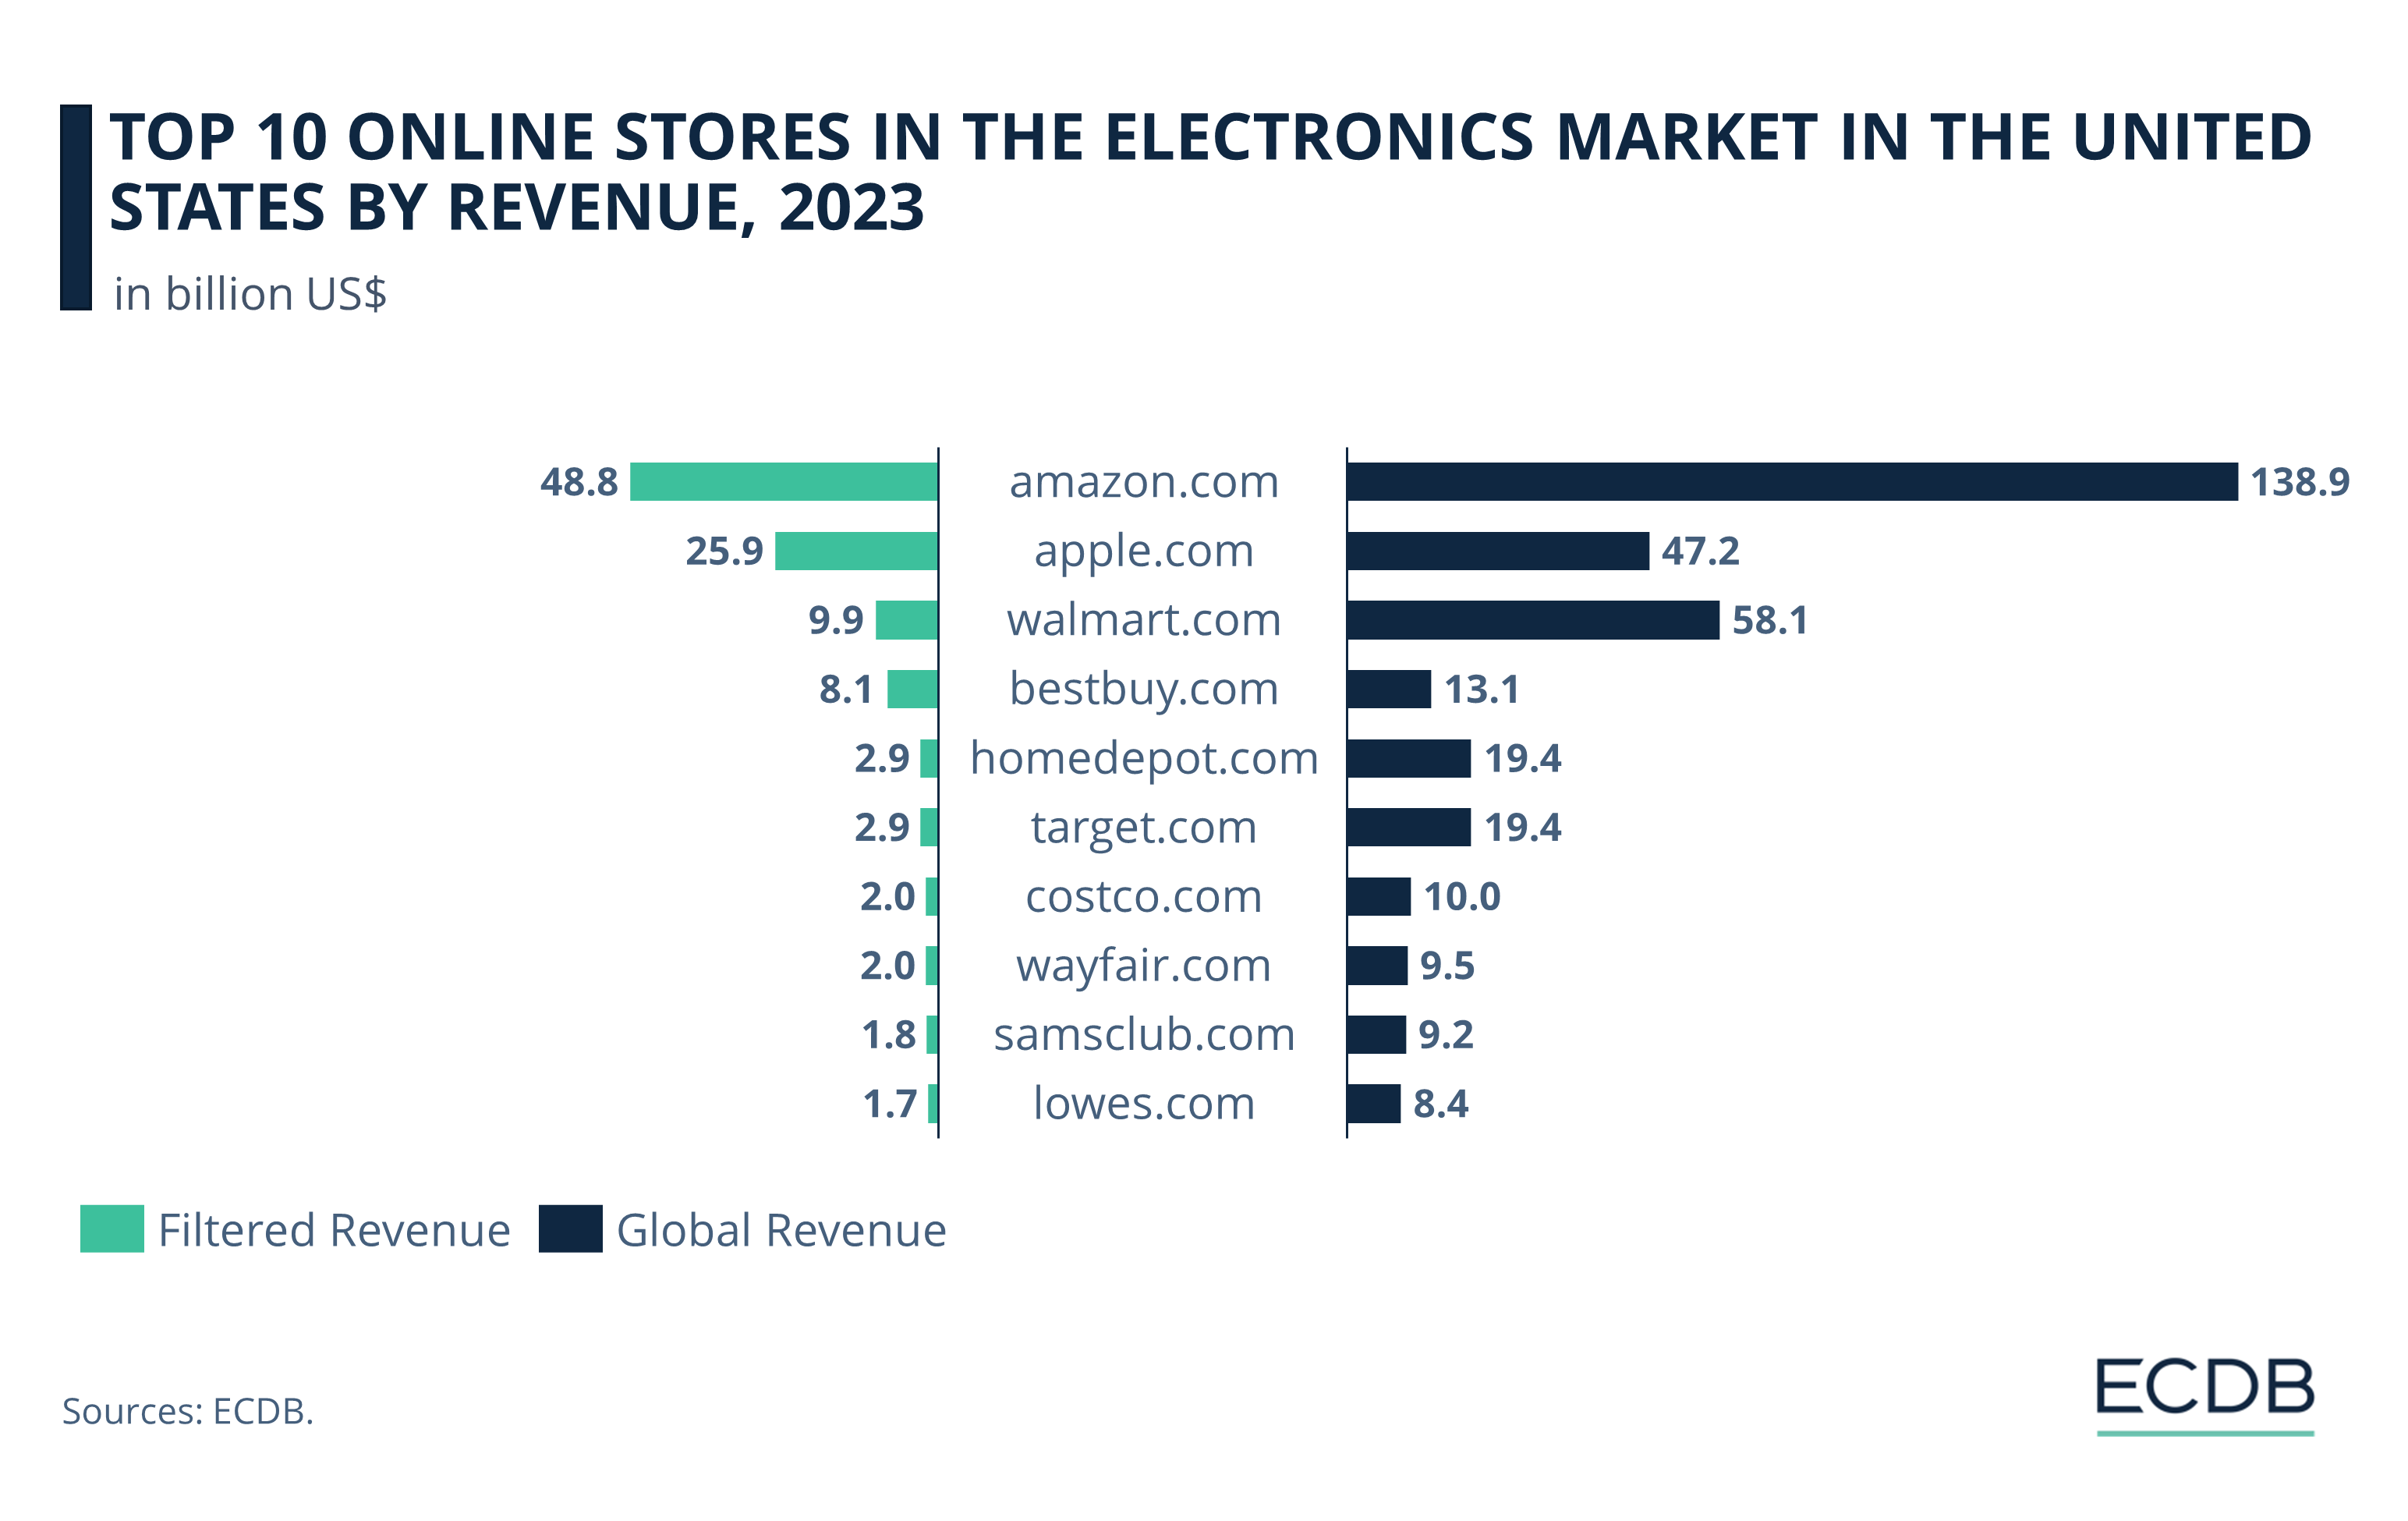 Top 10 Online Stores in the Electronics Market in the United States by Revenue, 2023